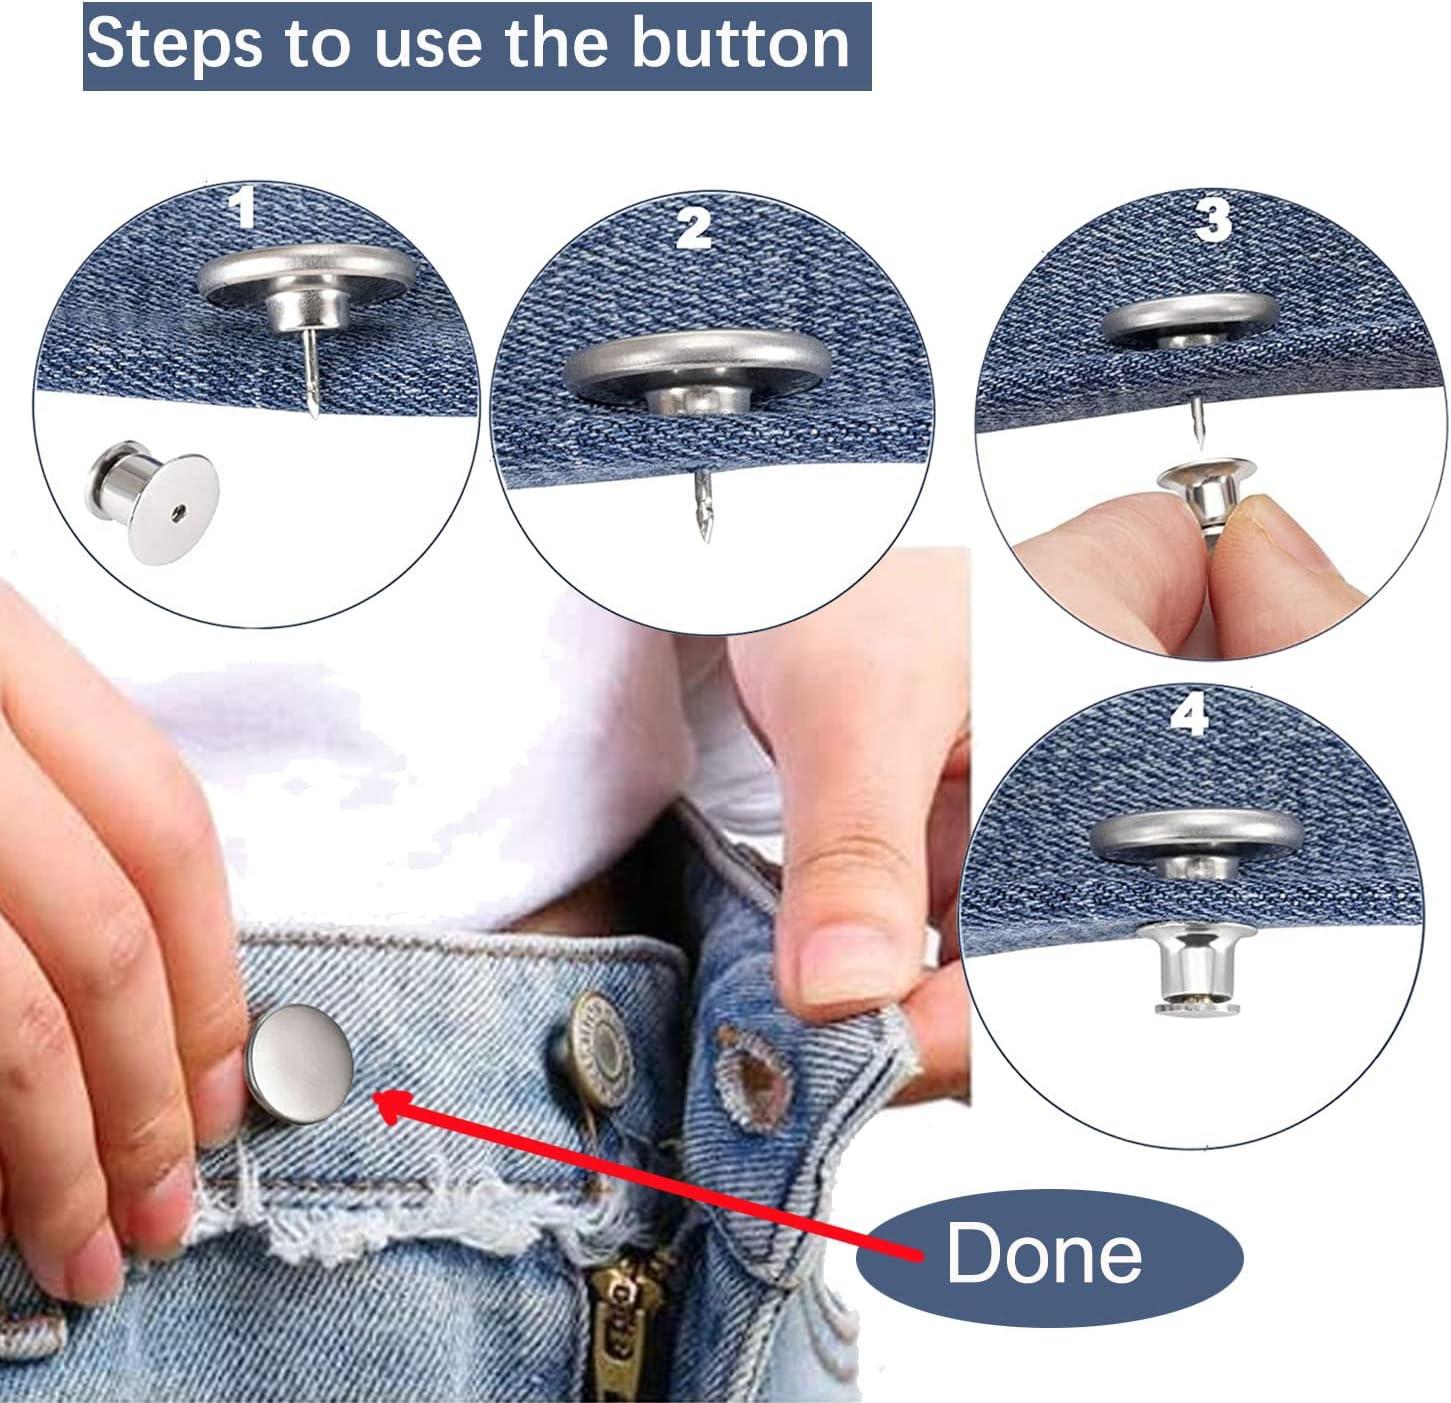 Replacement Jean Buttons,8pcs Button Pins for Jeans,17mm